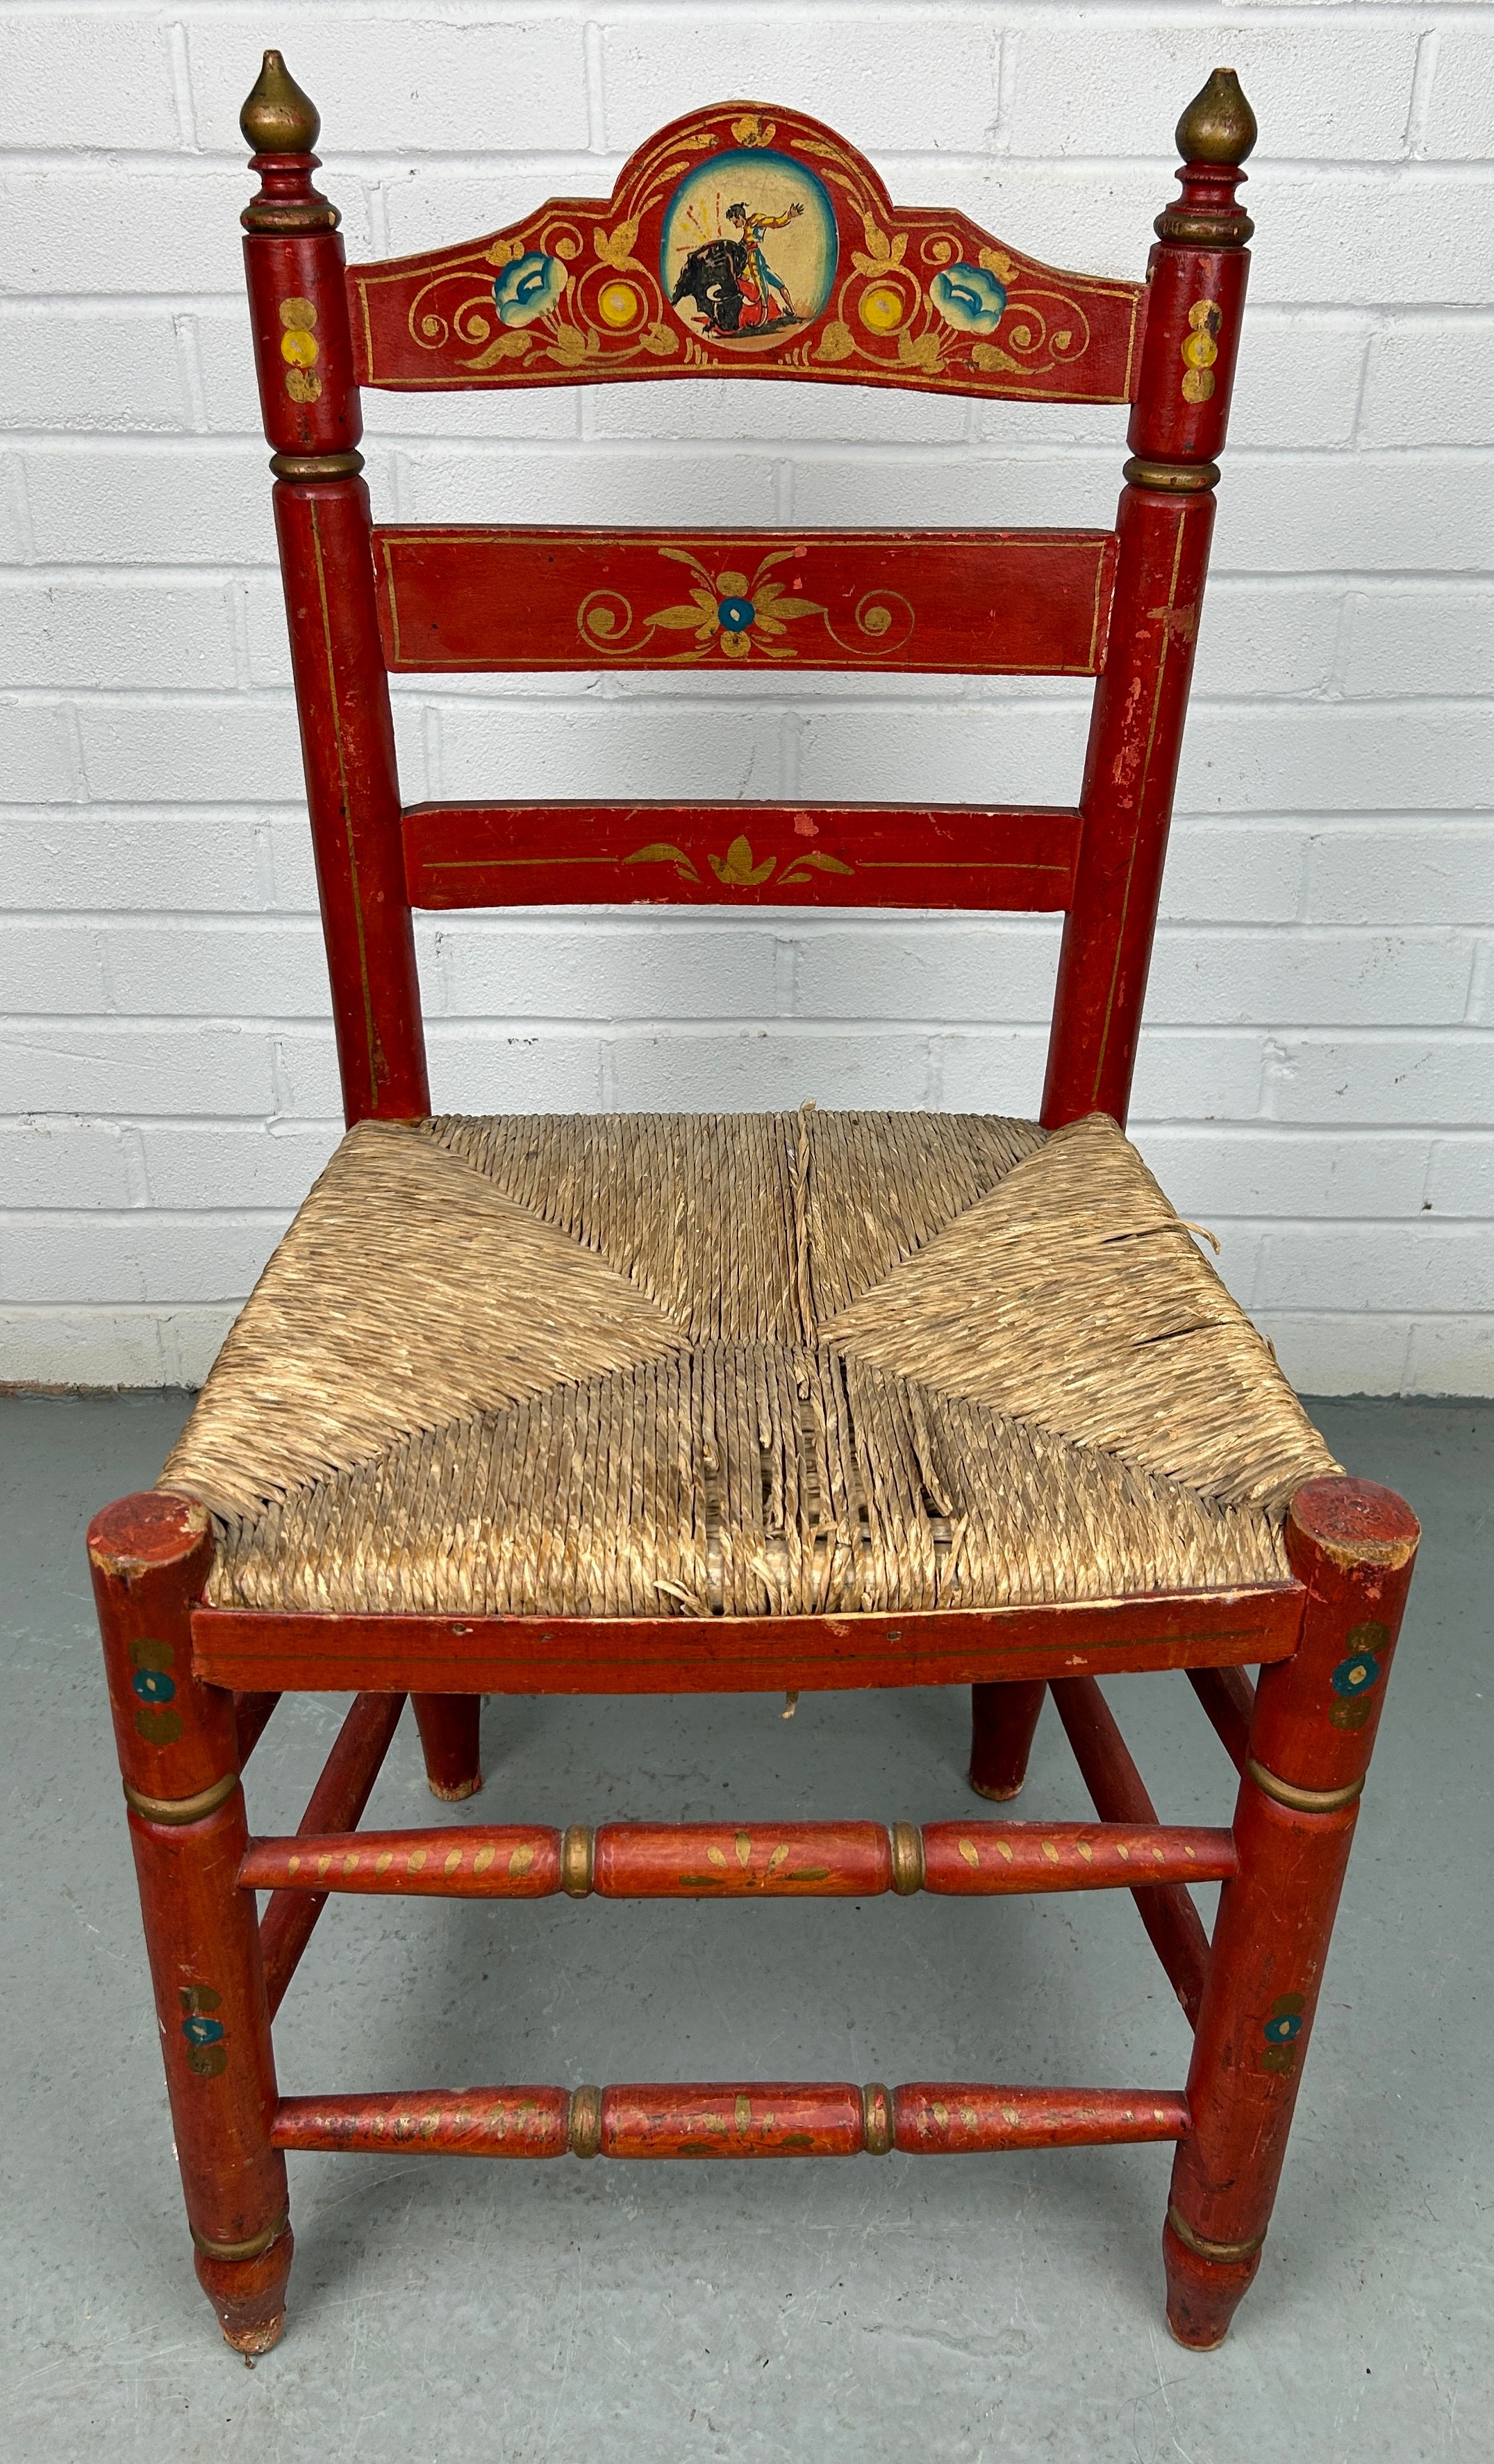 A RED SPANISH CHAIR WITH RUSH SEAT PAINTED WITH SCENE OF A MATADOR, 90cm x 40cm x 35cm - Image 2 of 5